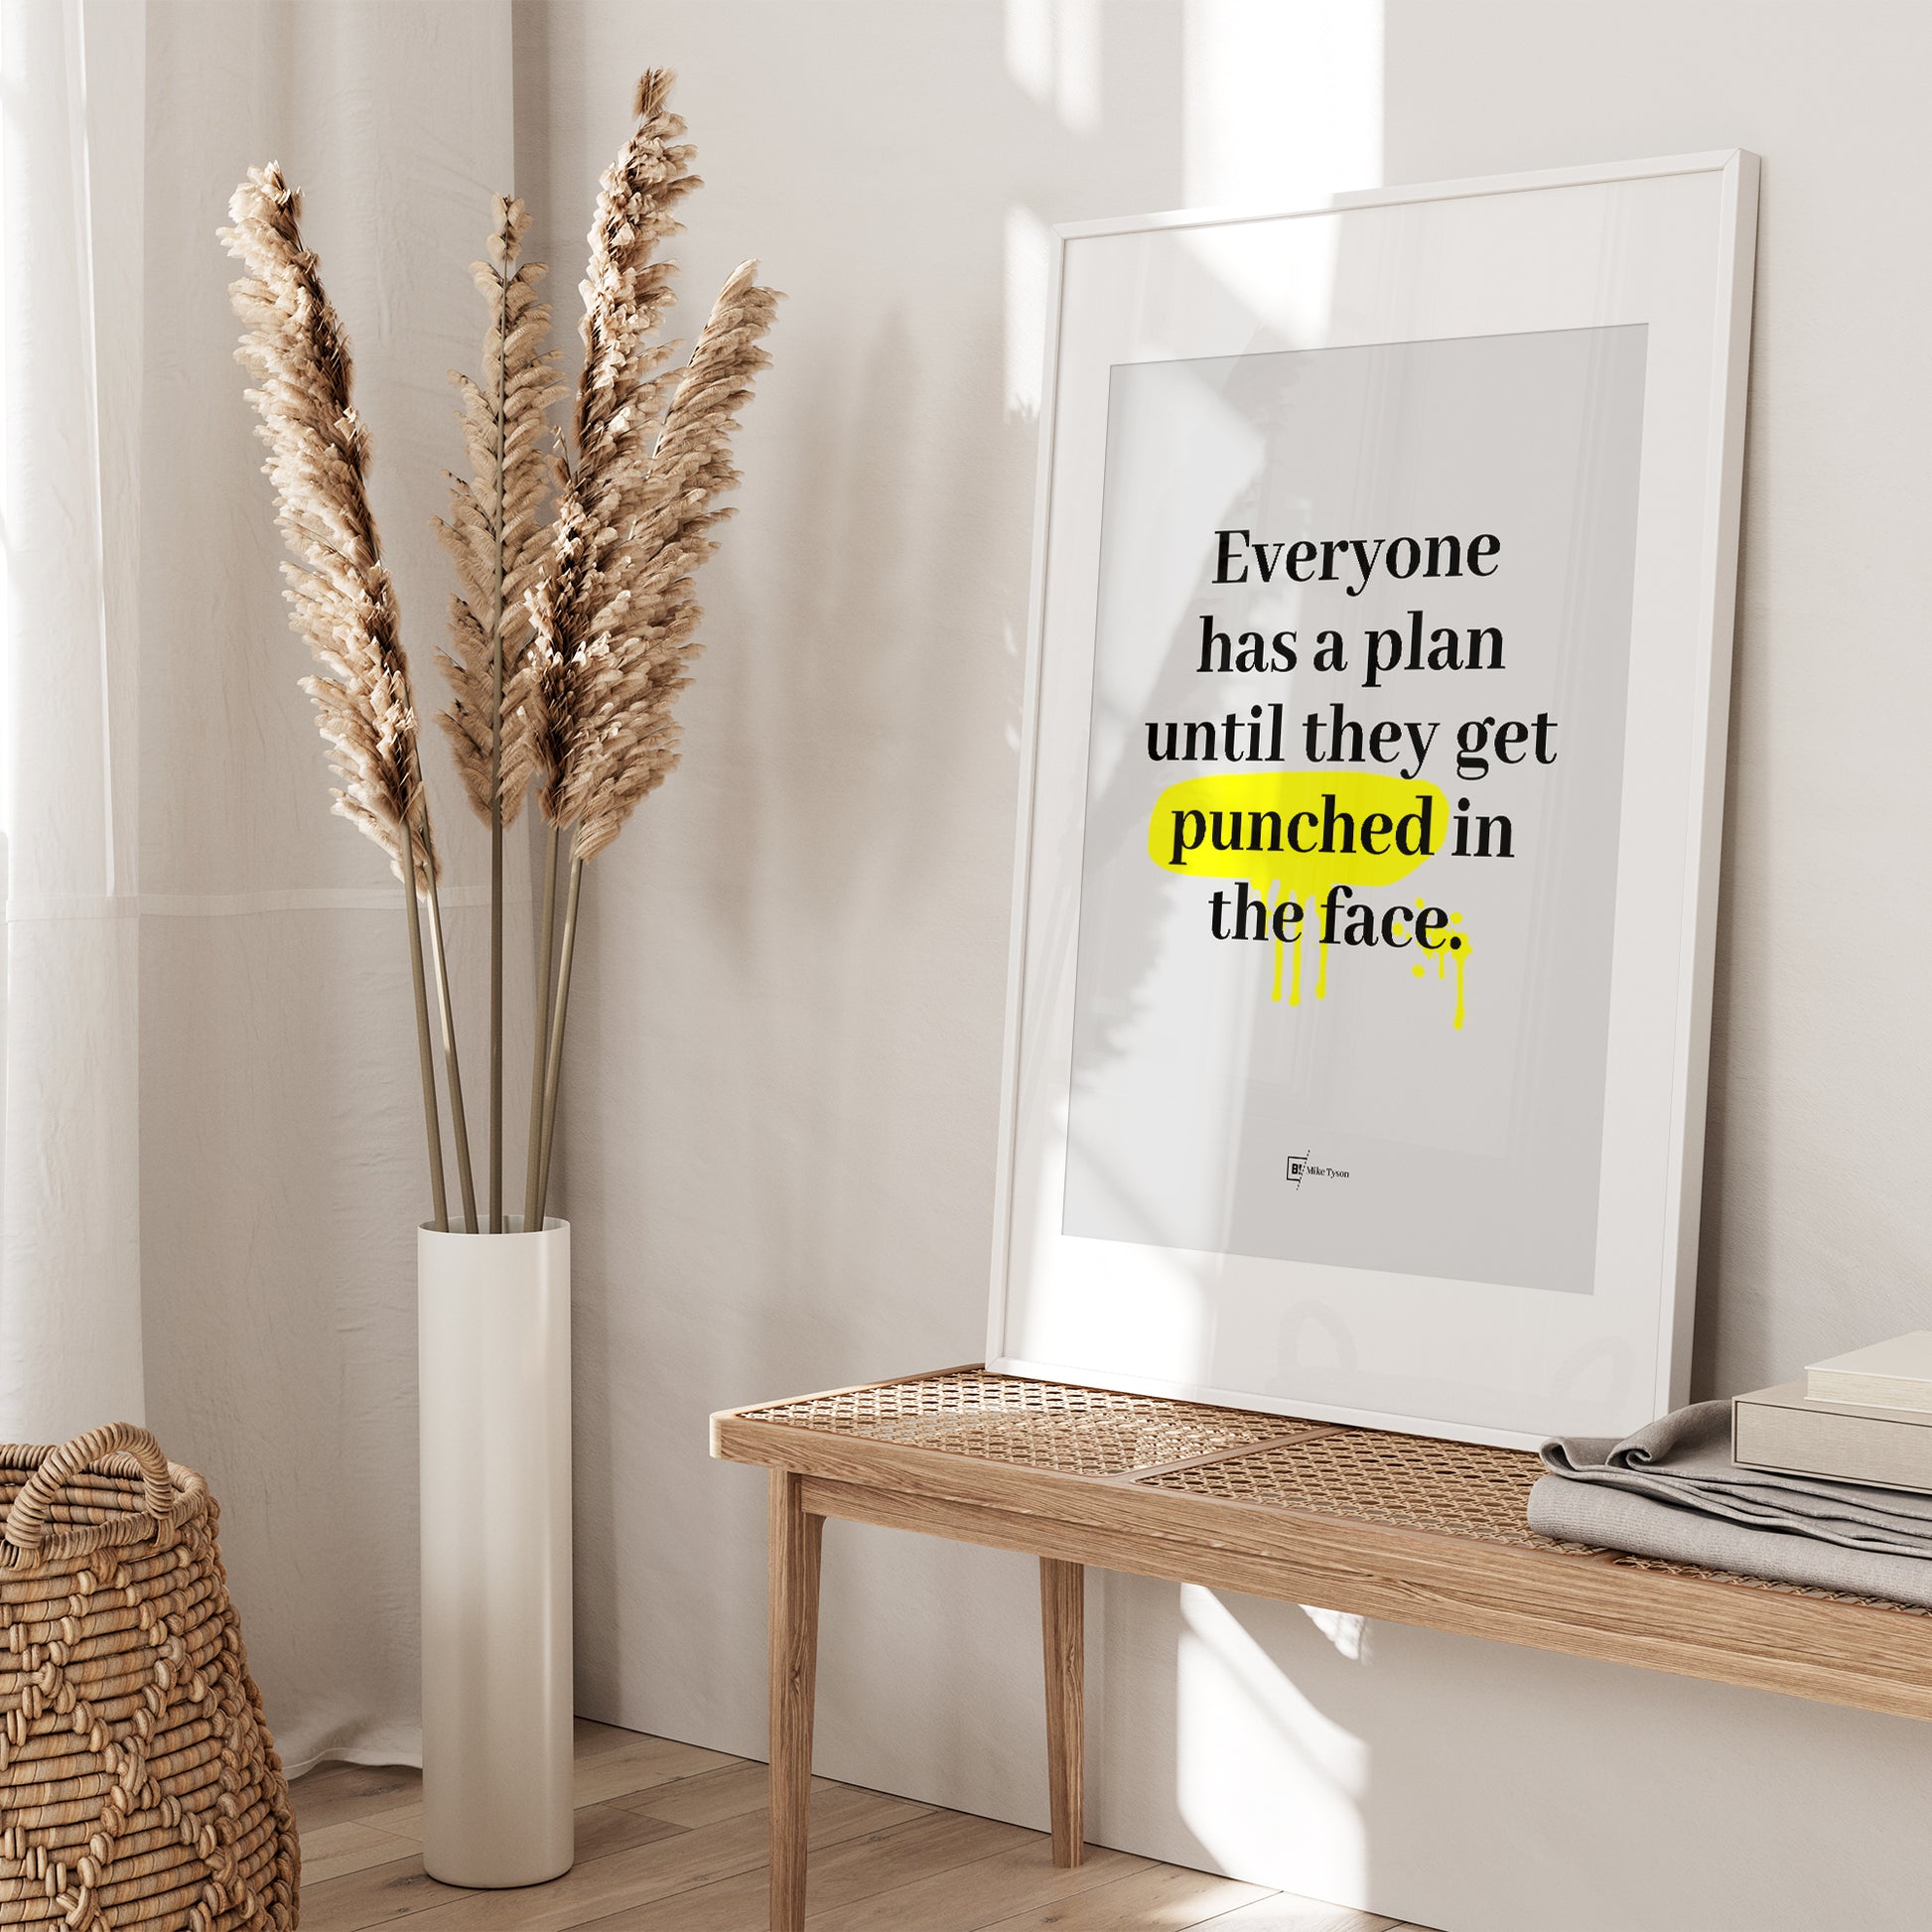 Be inspired by Mike Tyson's famous "Everyone has a plan until they get punched in the face" quote art print. This artwork was printed using the giclée process on archival acid-free paper and is presented in a white frame with passe-partout that captures its timeless beauty in every detail.